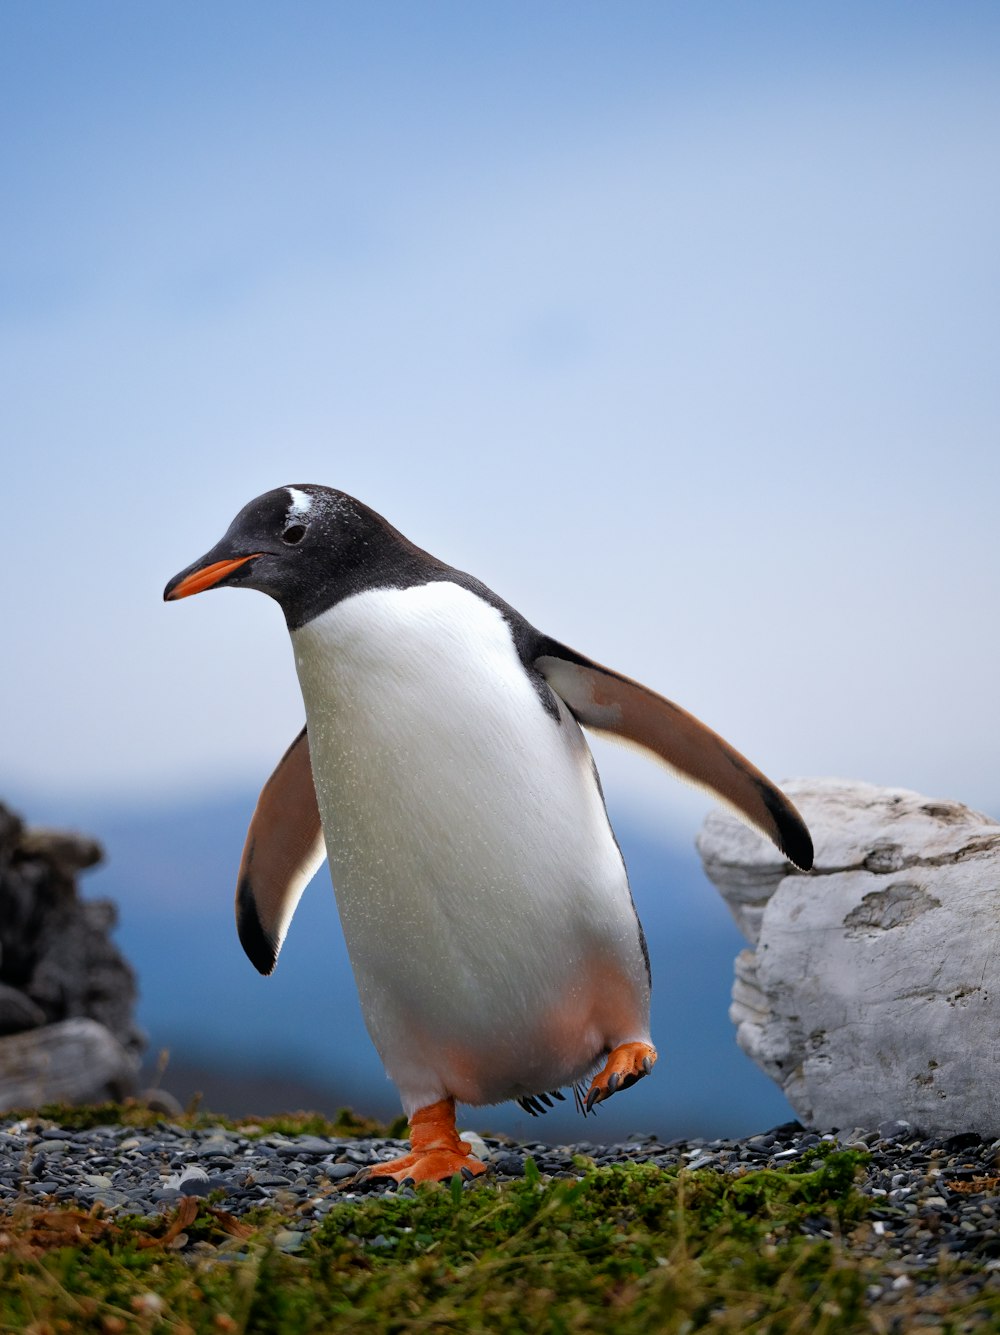 a penguin is standing on a rocky area